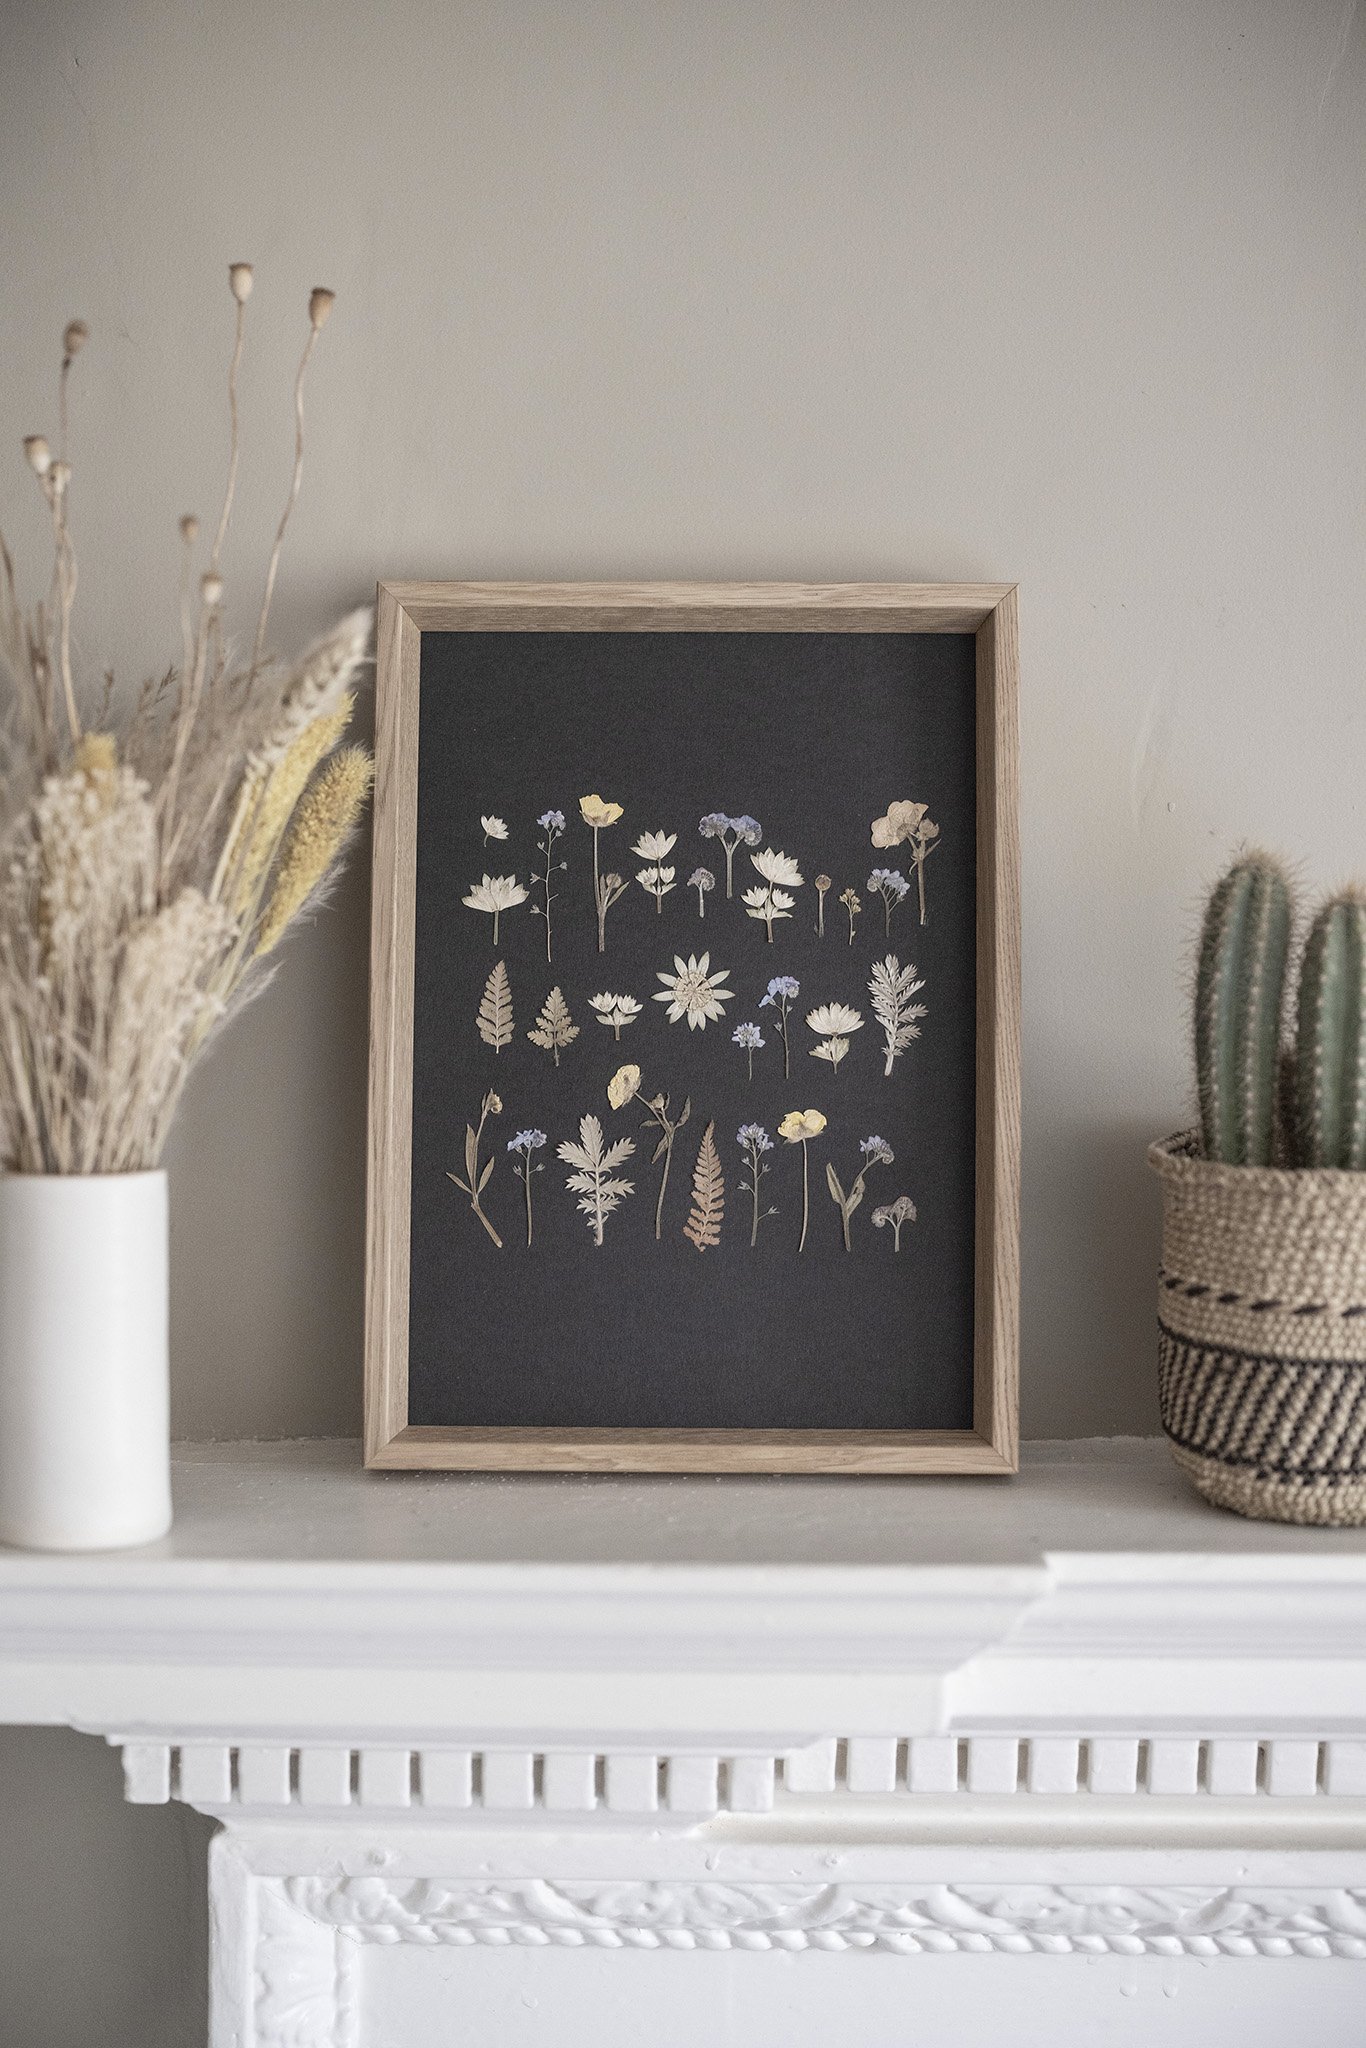 Small Pressed Flower Artwork - £109 - Paper Thin Moon